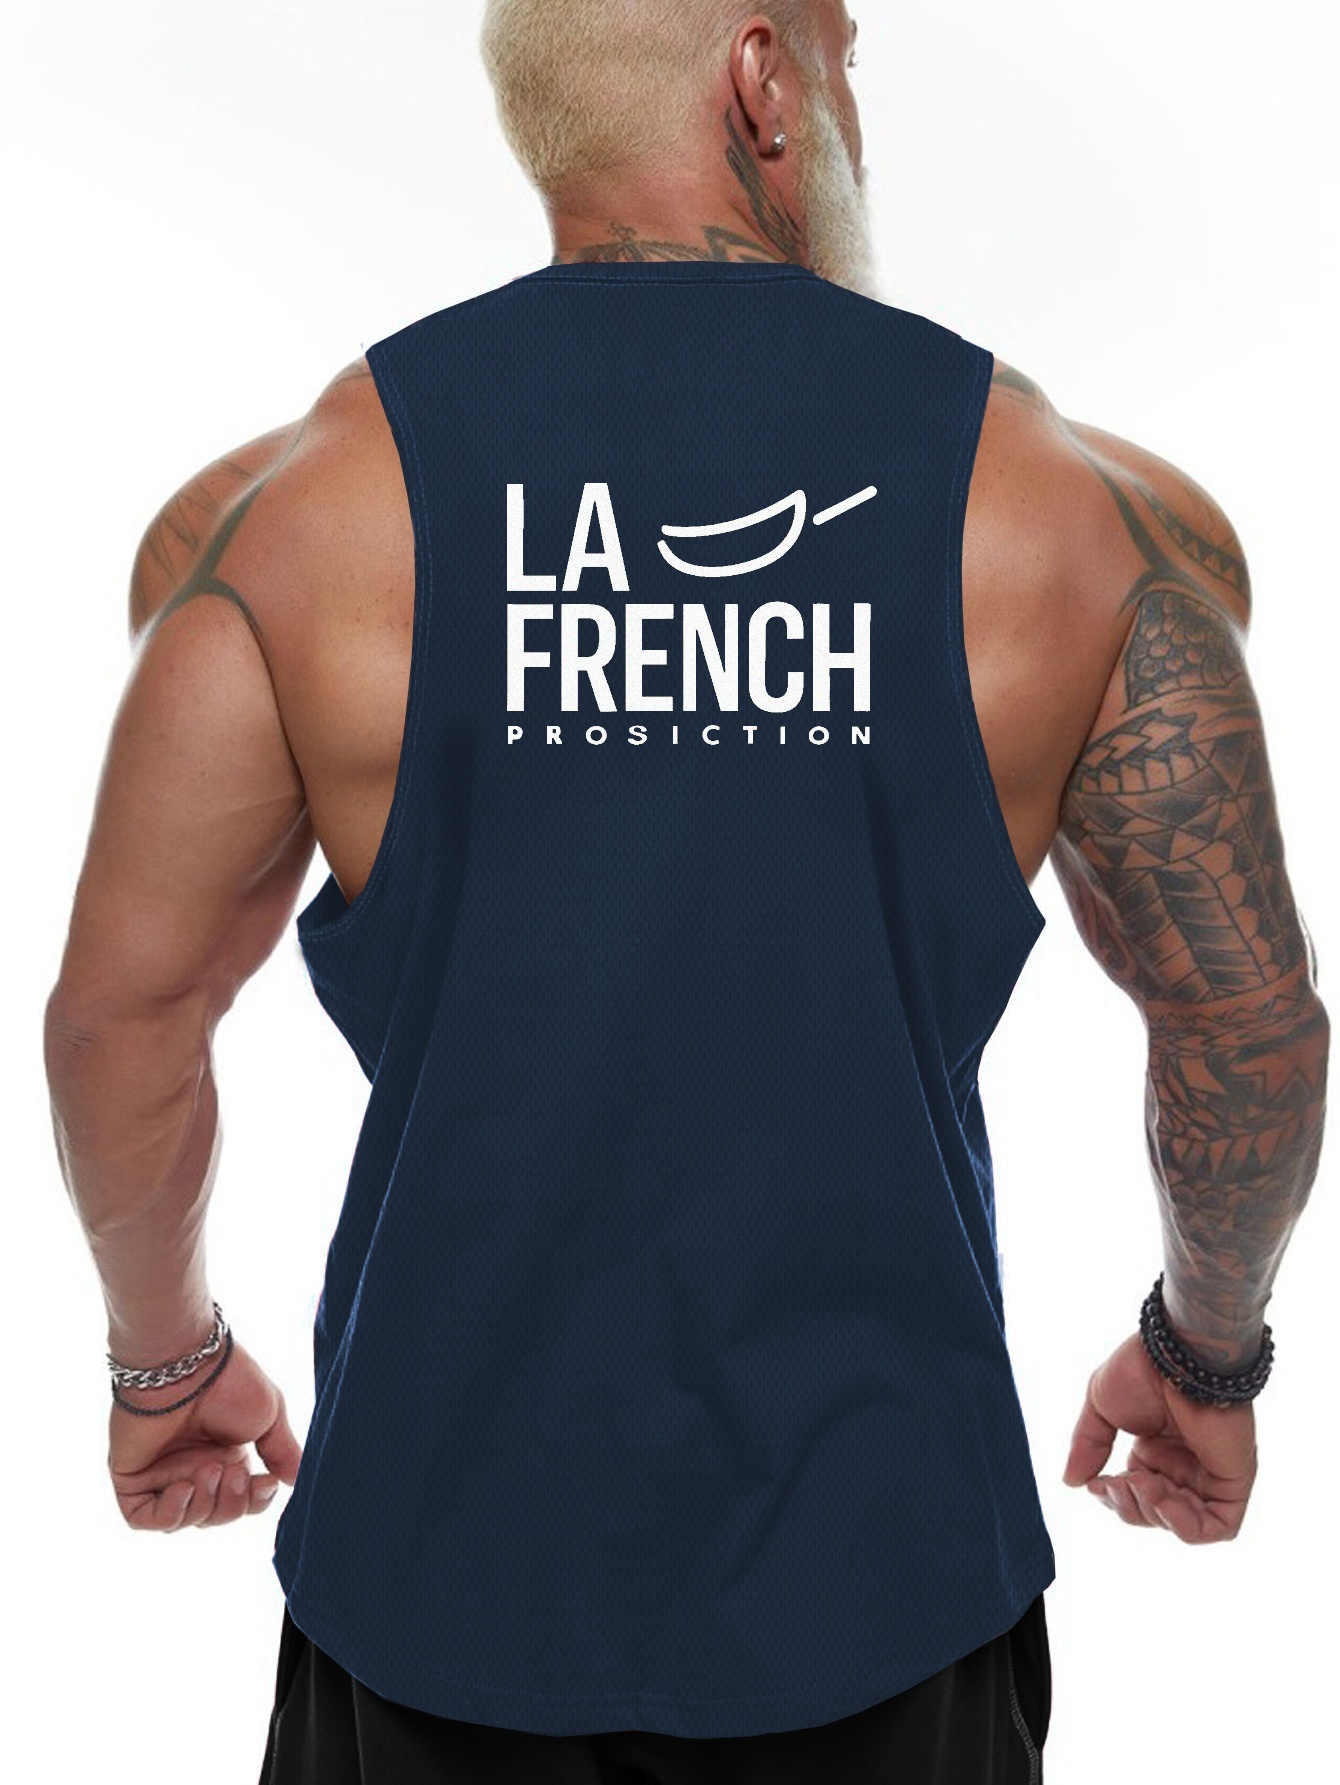 New Frenchy training jogging suit for CrossFit